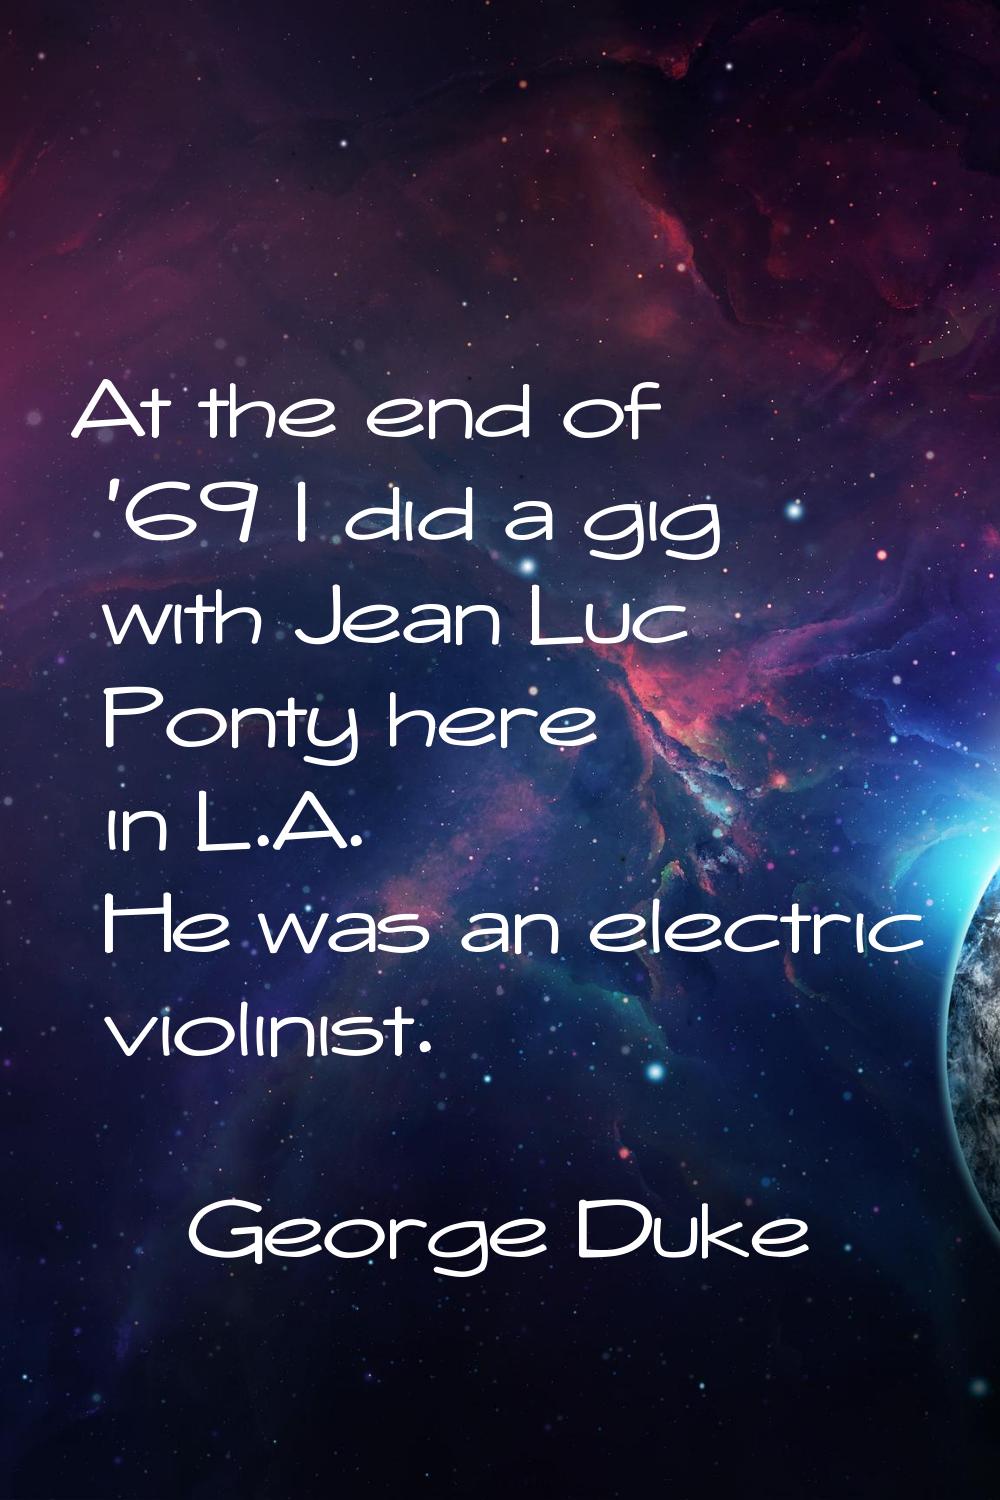 At the end of '69 I did a gig with Jean Luc Ponty here in L.A. He was an electric violinist.